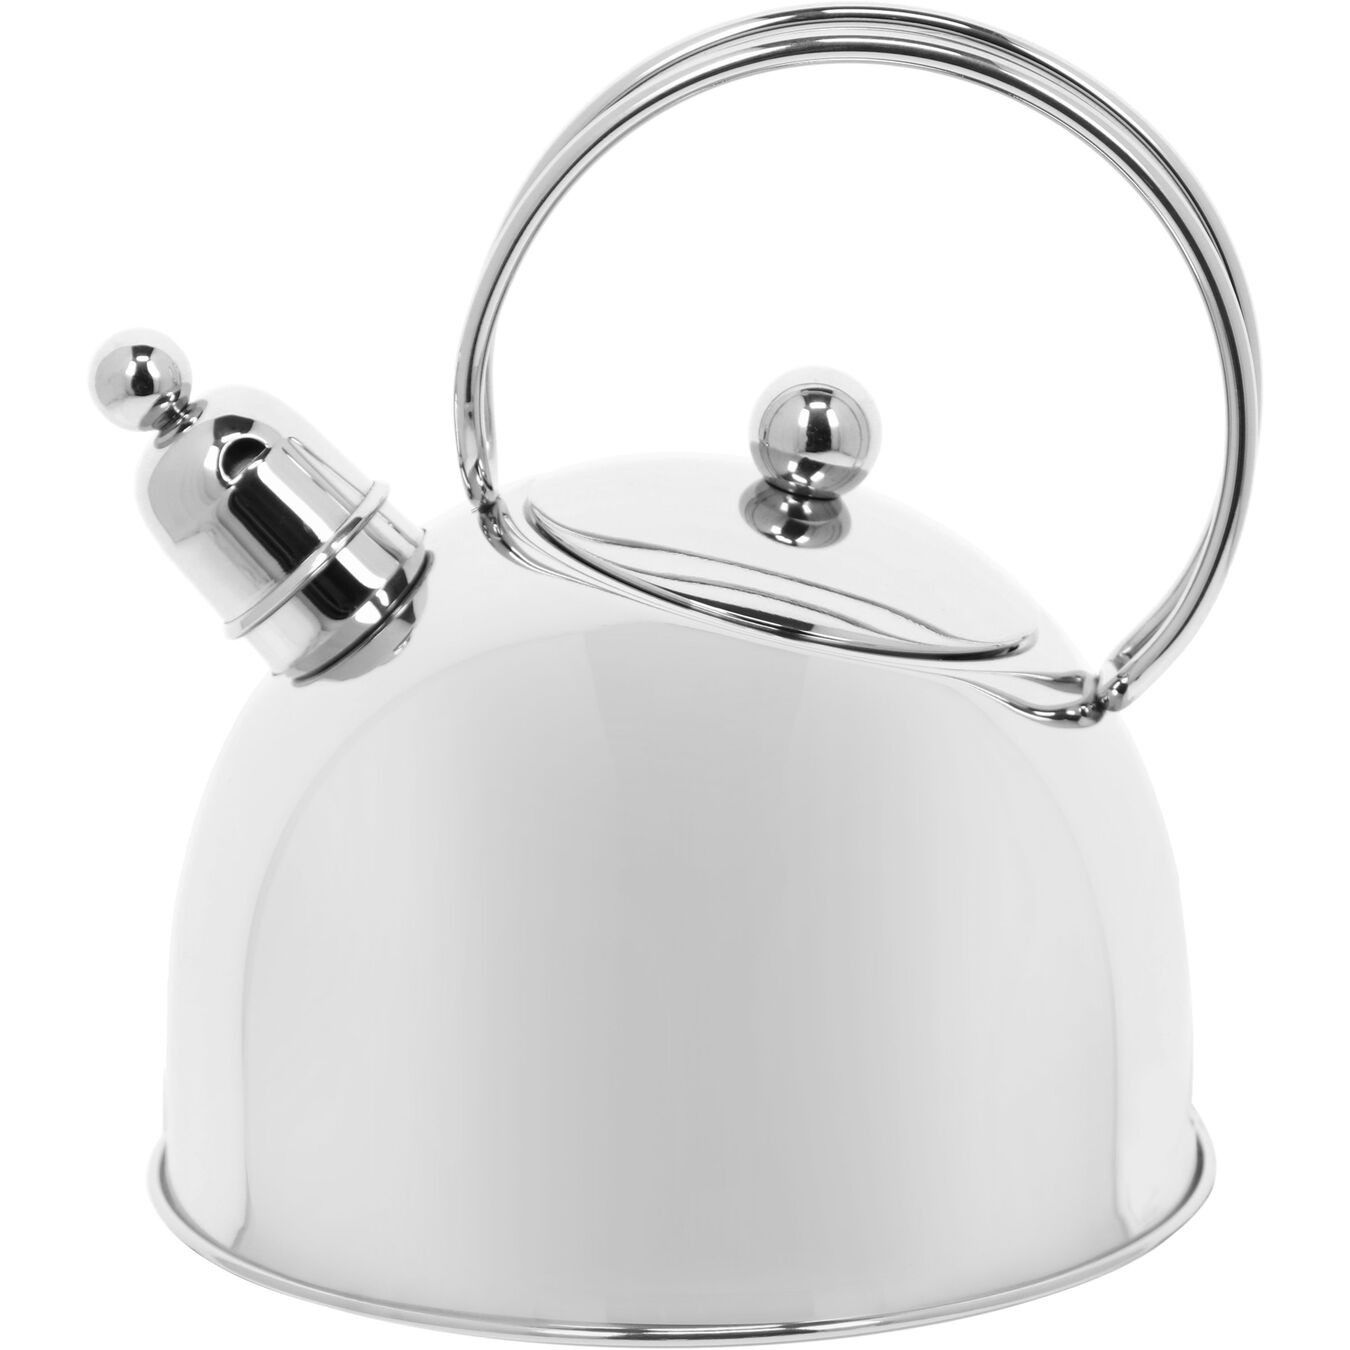 2.6 qt Whistling Tea Kettle, 18/10 Stainless Steel ,,large 1